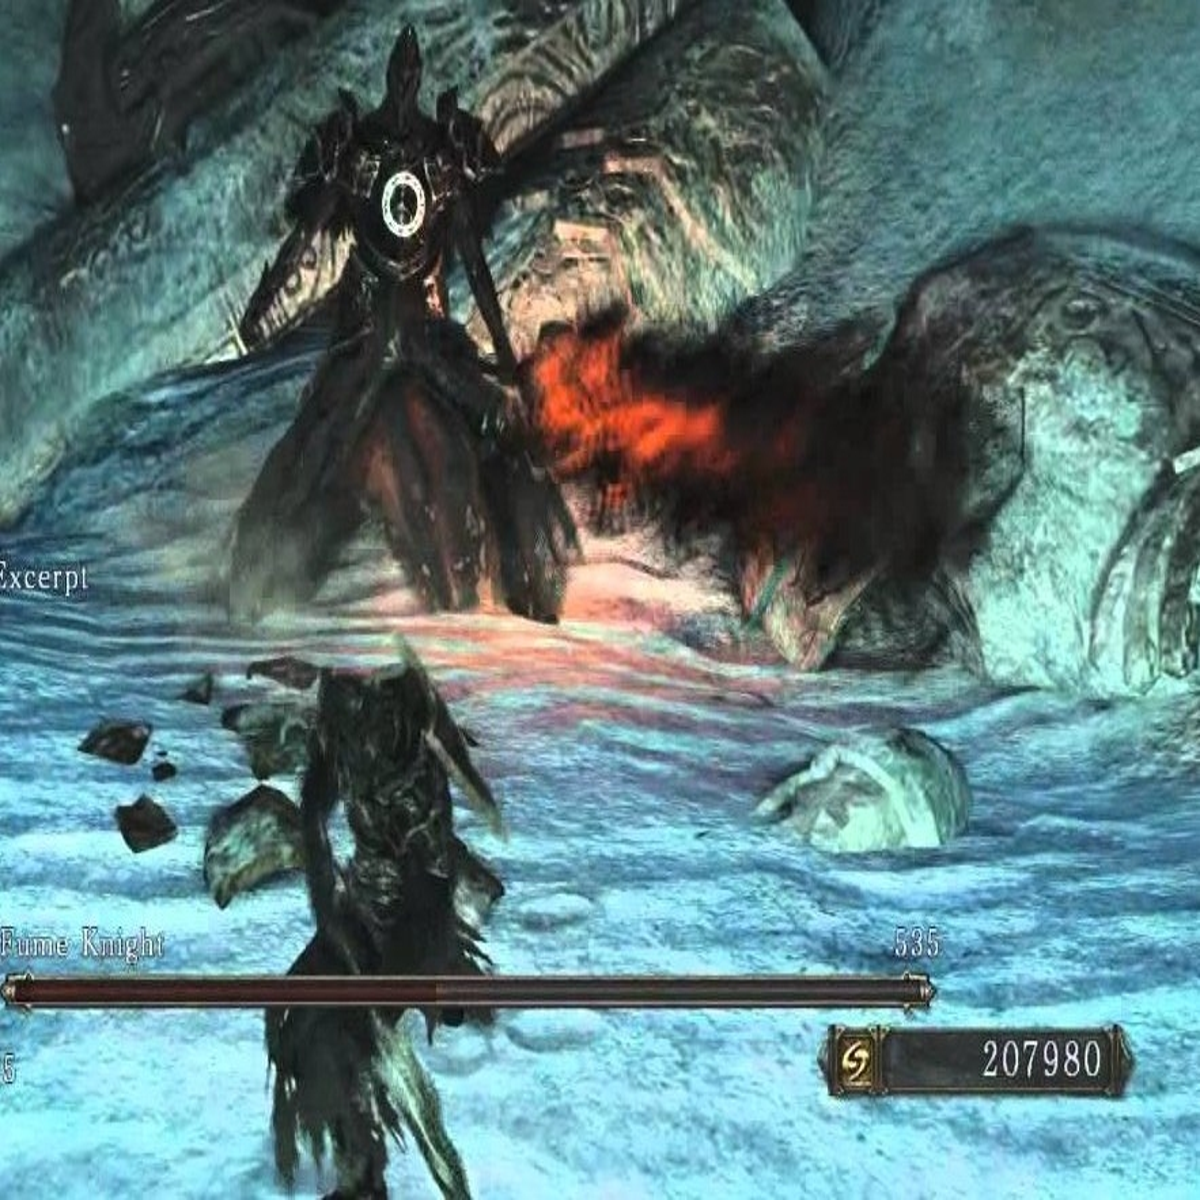 Scholar of the First Sin - Dark Souls II Guide - IGN